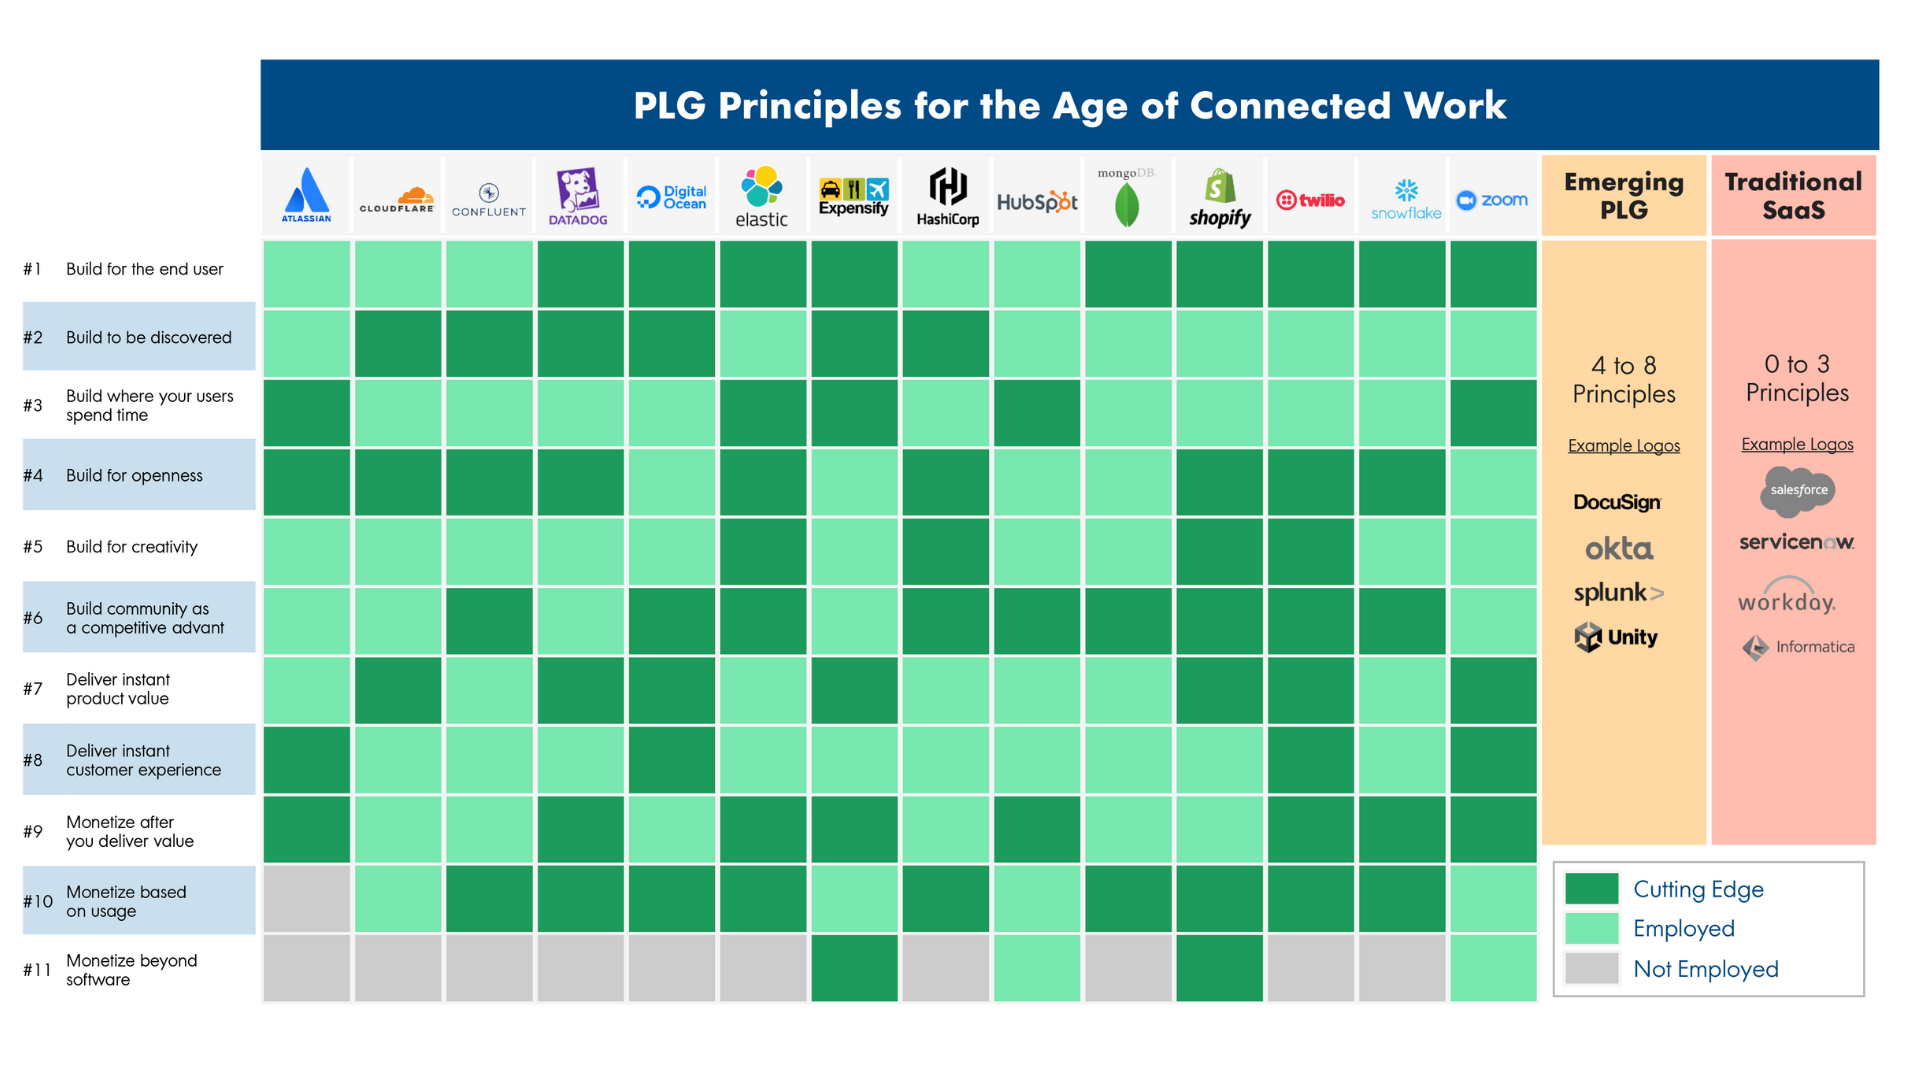 PLG Principles for the Age of Connected Work